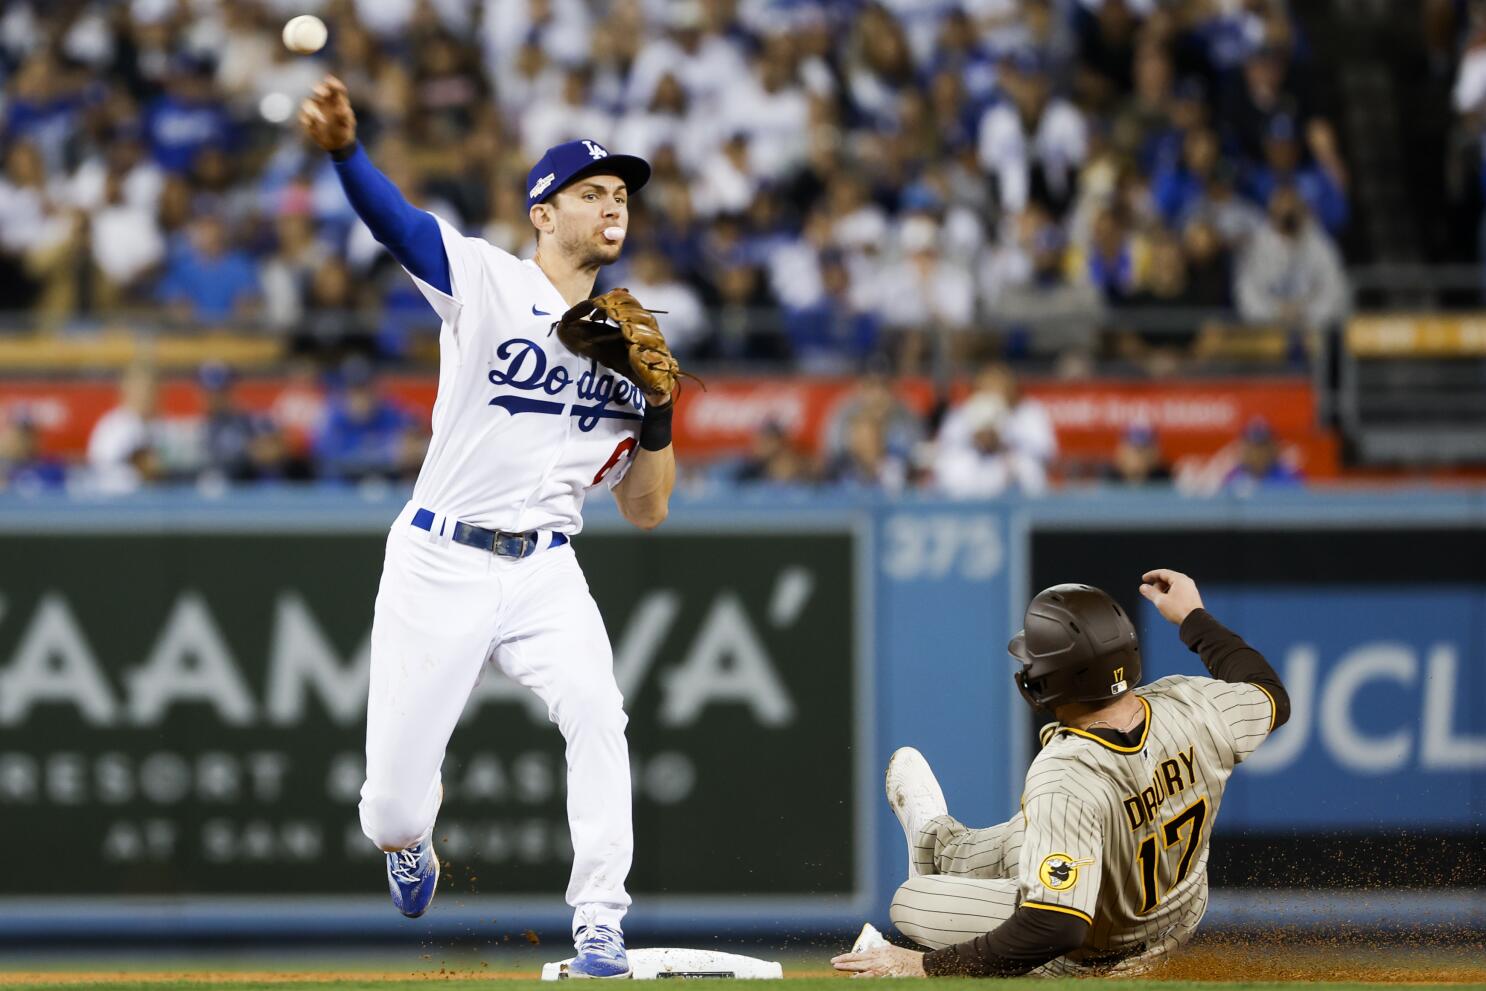 Trea Turner, Will Smith deliver for Dodgers in NLDS Game 1